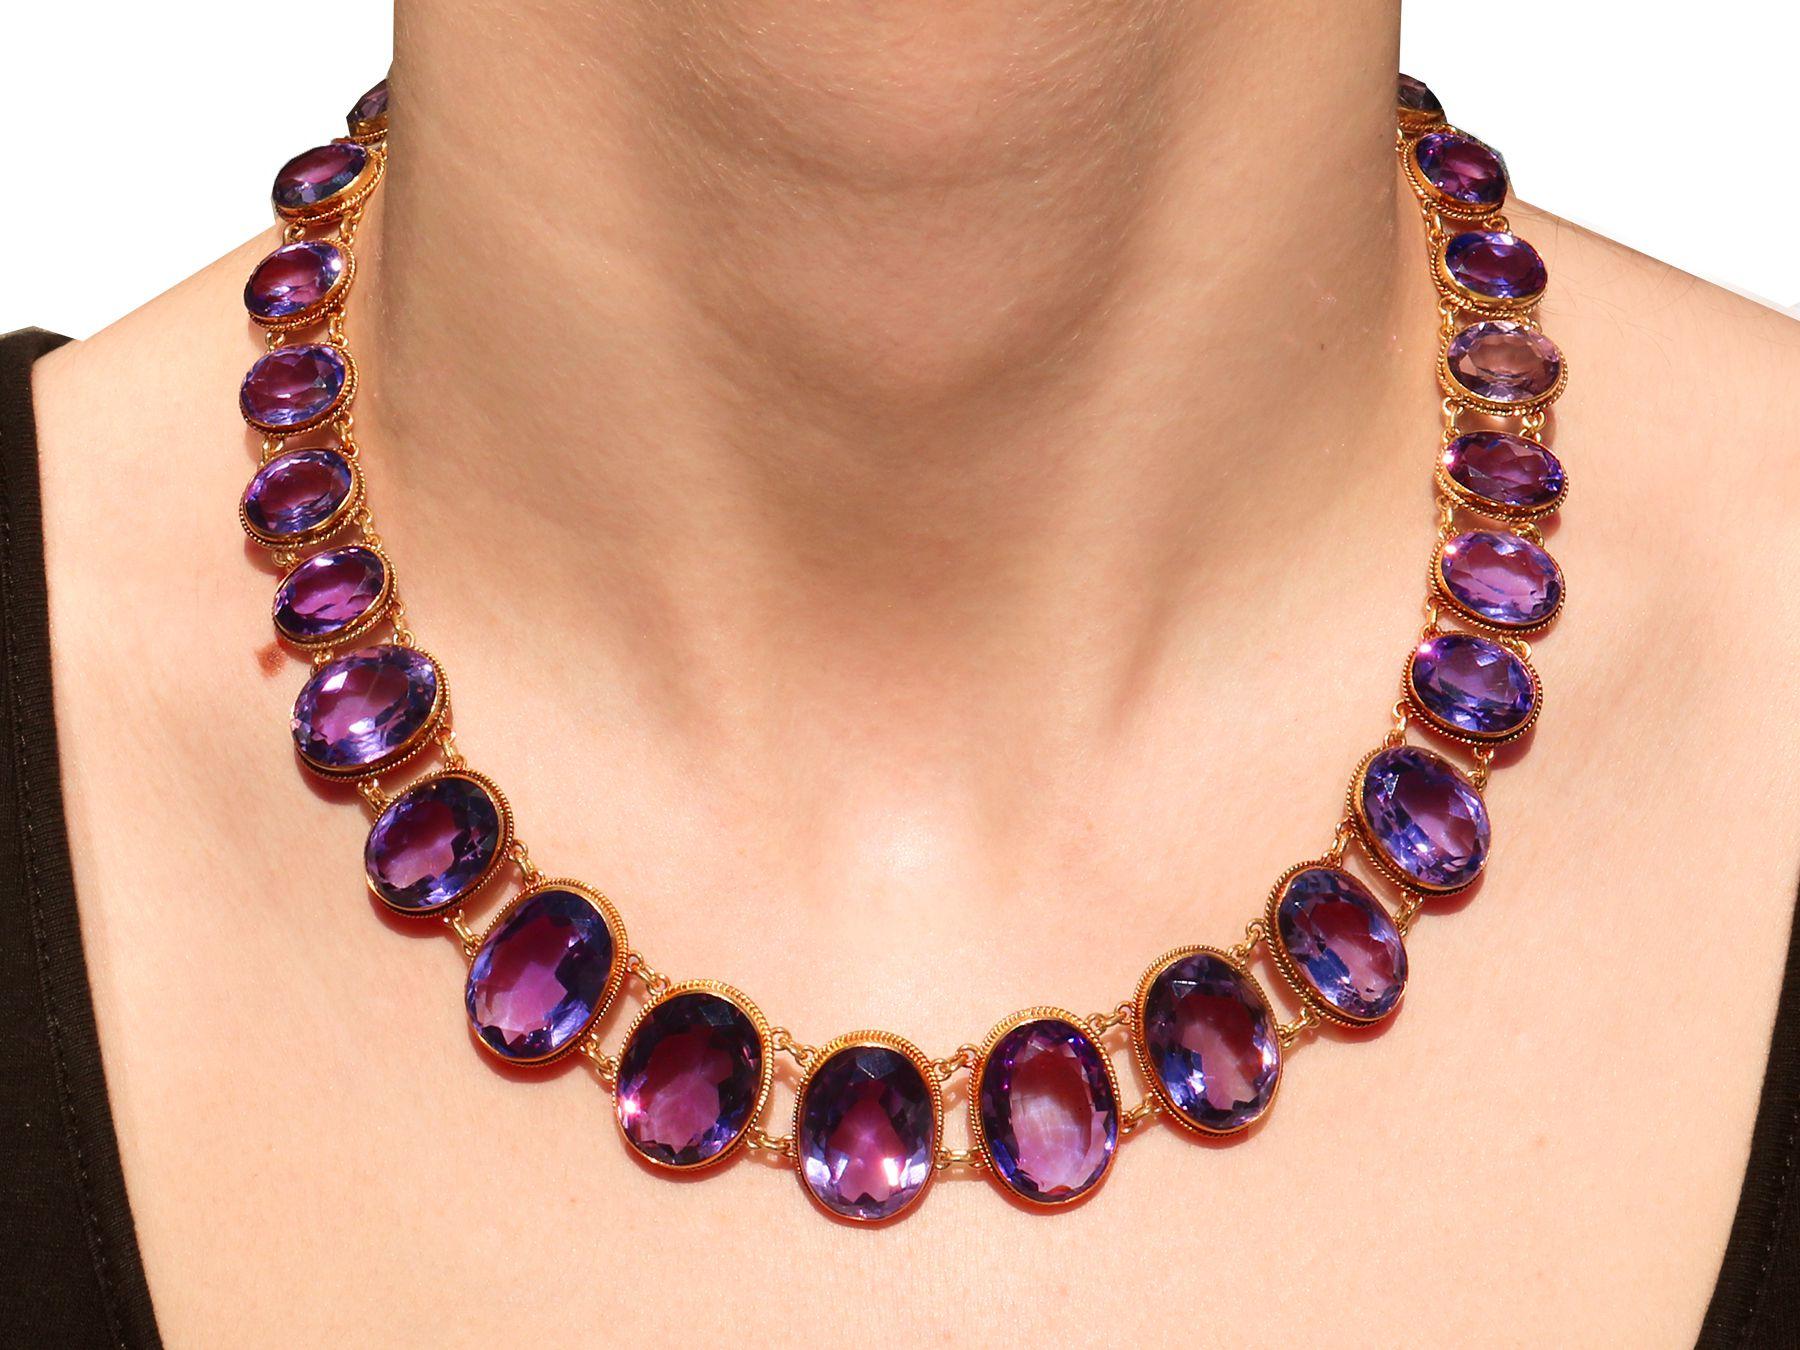 Antique Victorian 274.91 Carat Amethyst and Yellow Gold Rivière Necklace For Sale 2